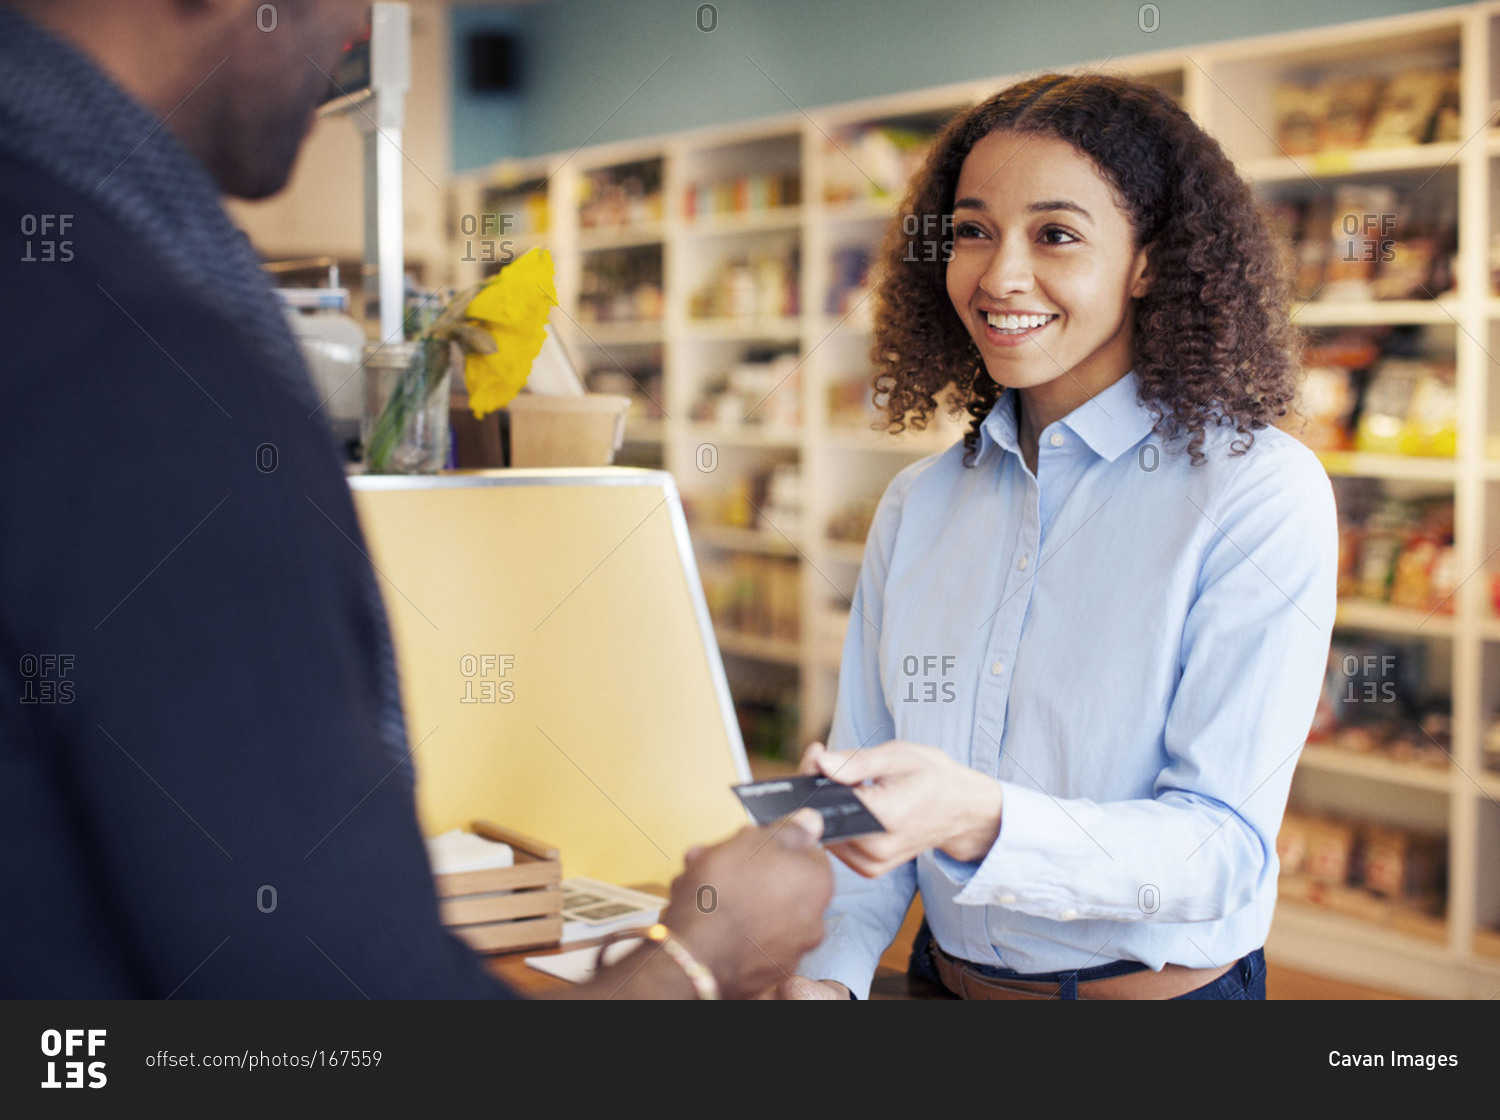 Cashier accepting a credit card from a customer